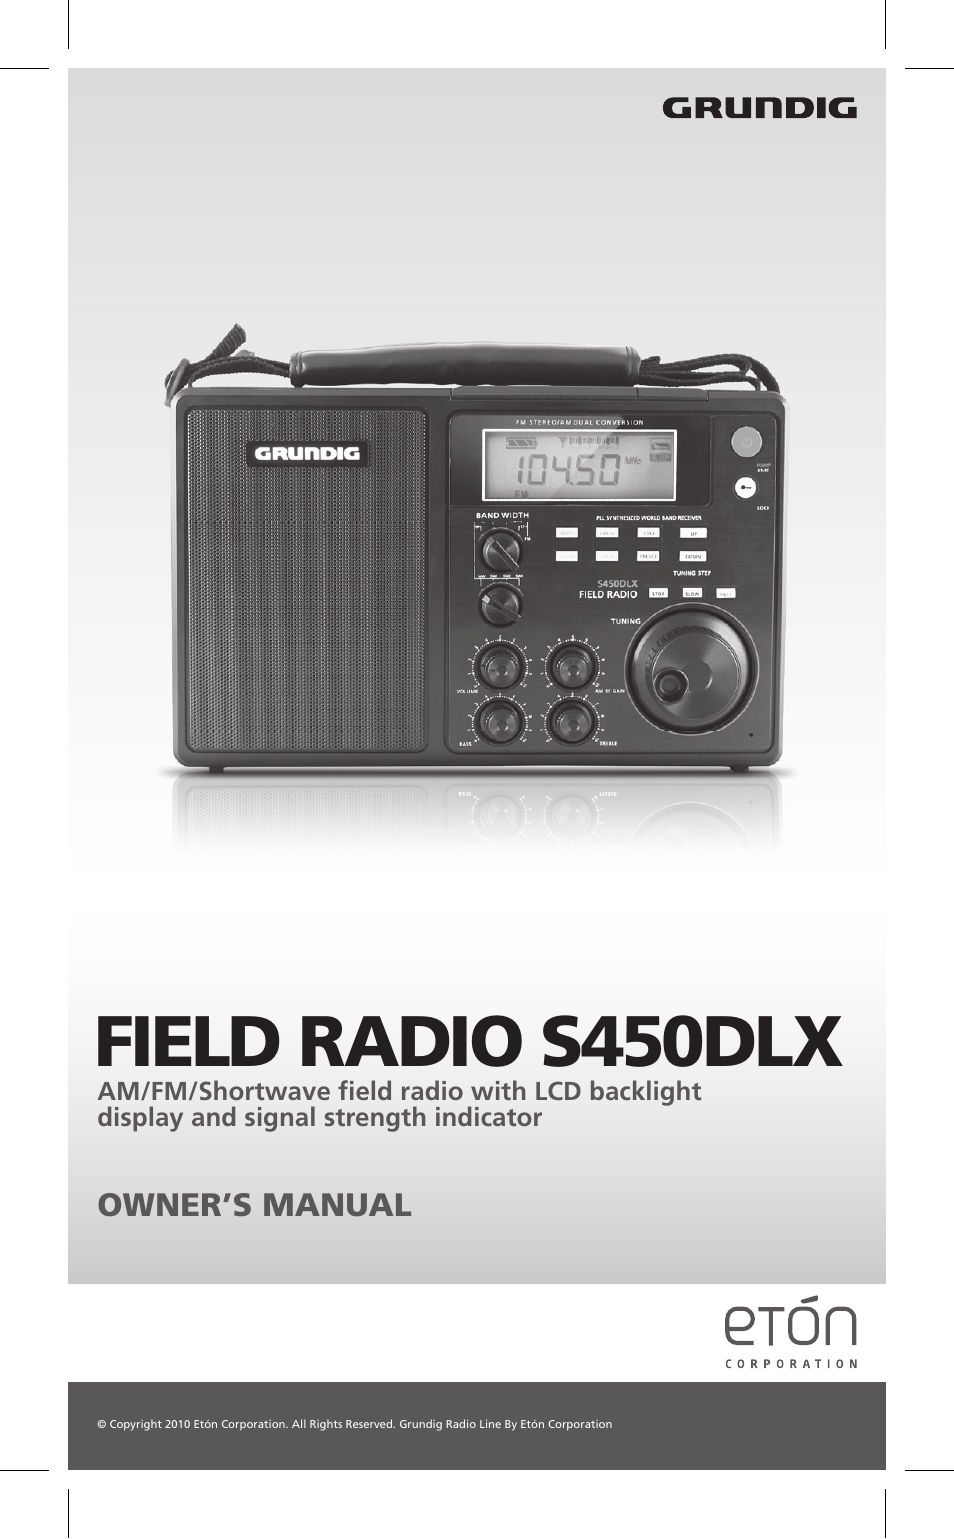 Grundig FIELD RADIO S450DLX User Manual | 86 pages